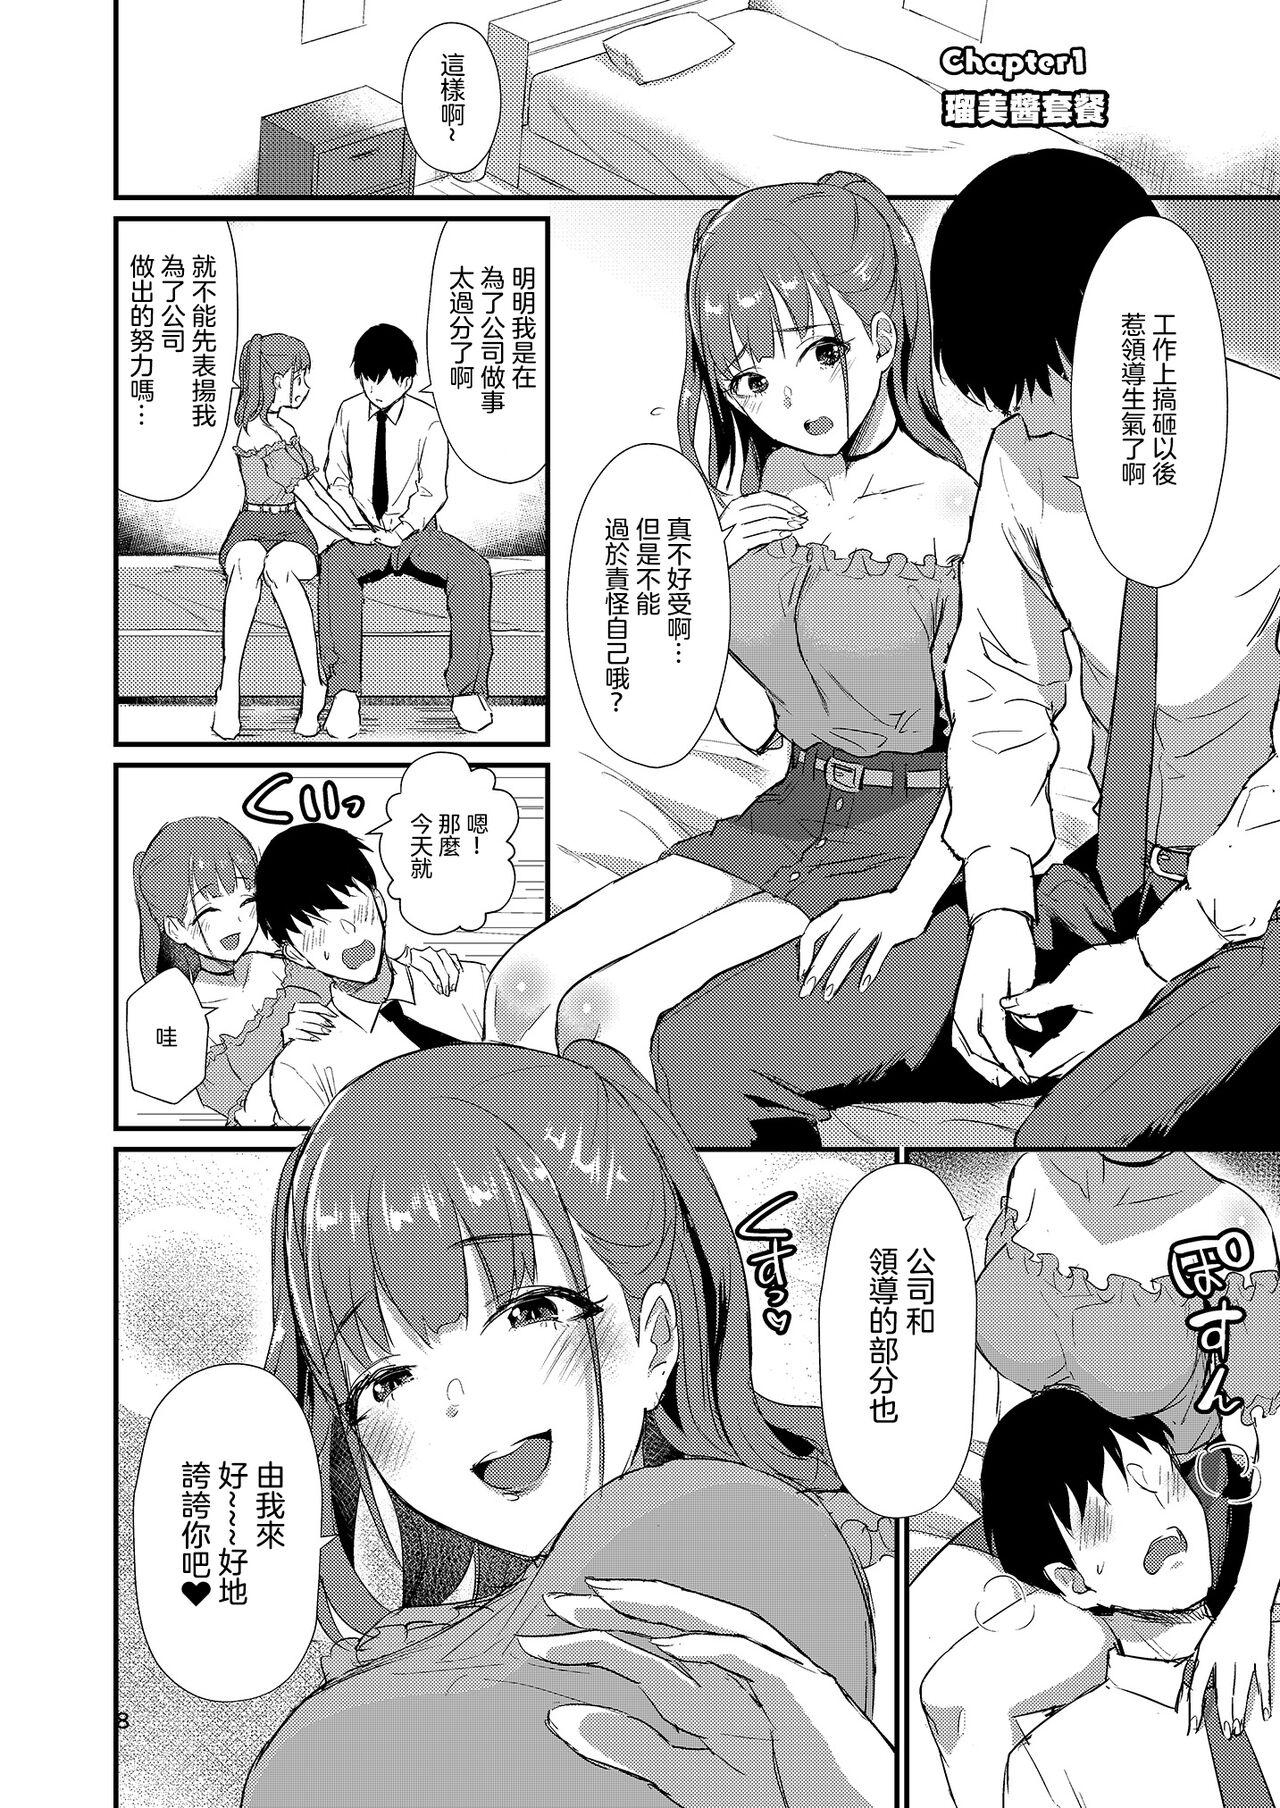 Amature Sex Homehome Home e Youkoso! - Welcome to Home Home Home! | 歡迎來到誇誇屋！ Twinks - Page 9